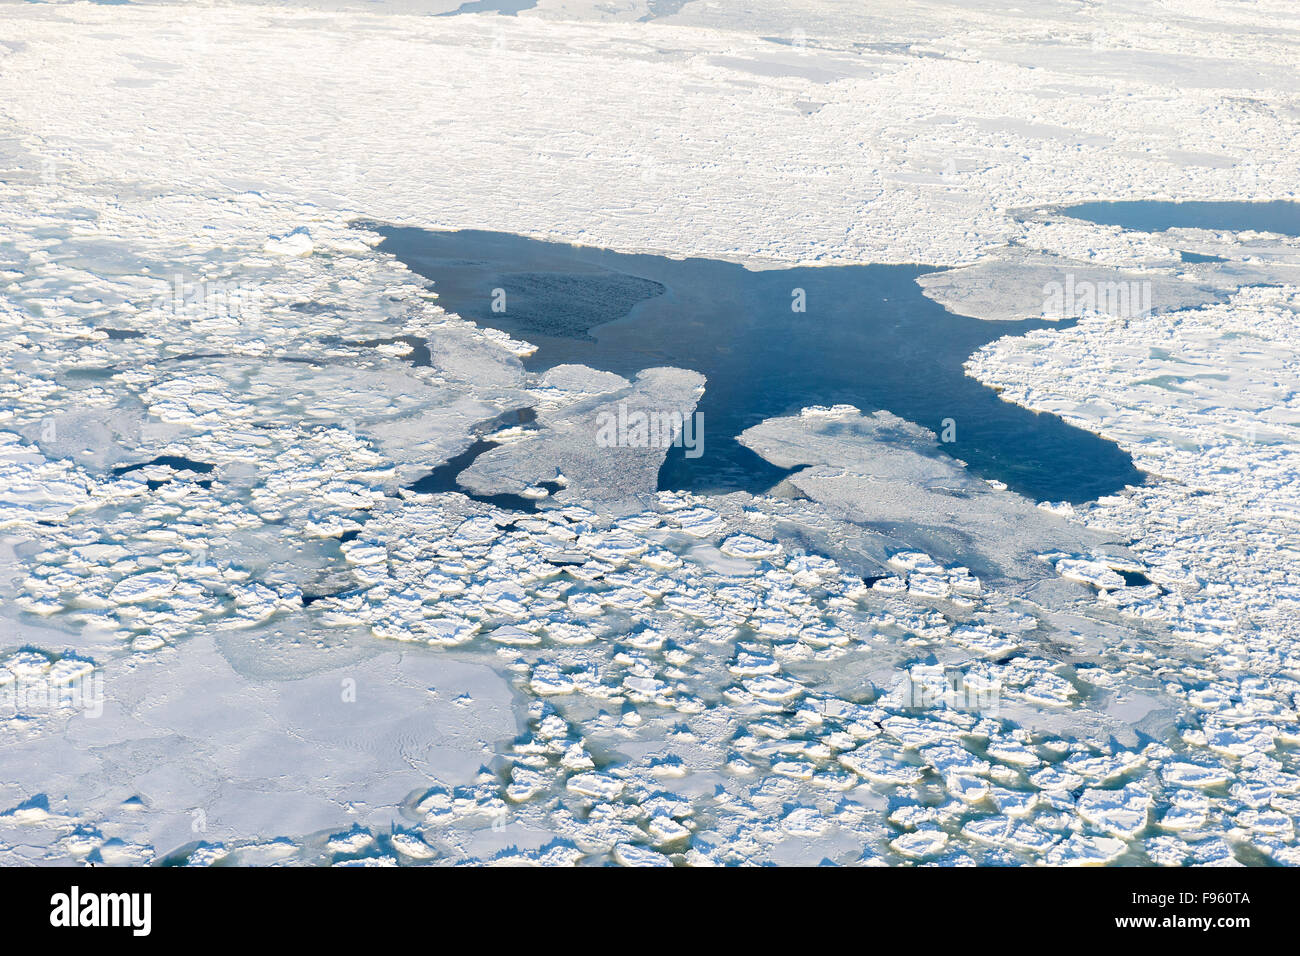 Aerial view of Hudson Bay during freezeup, near Churchill Manitoba. Stock Photo